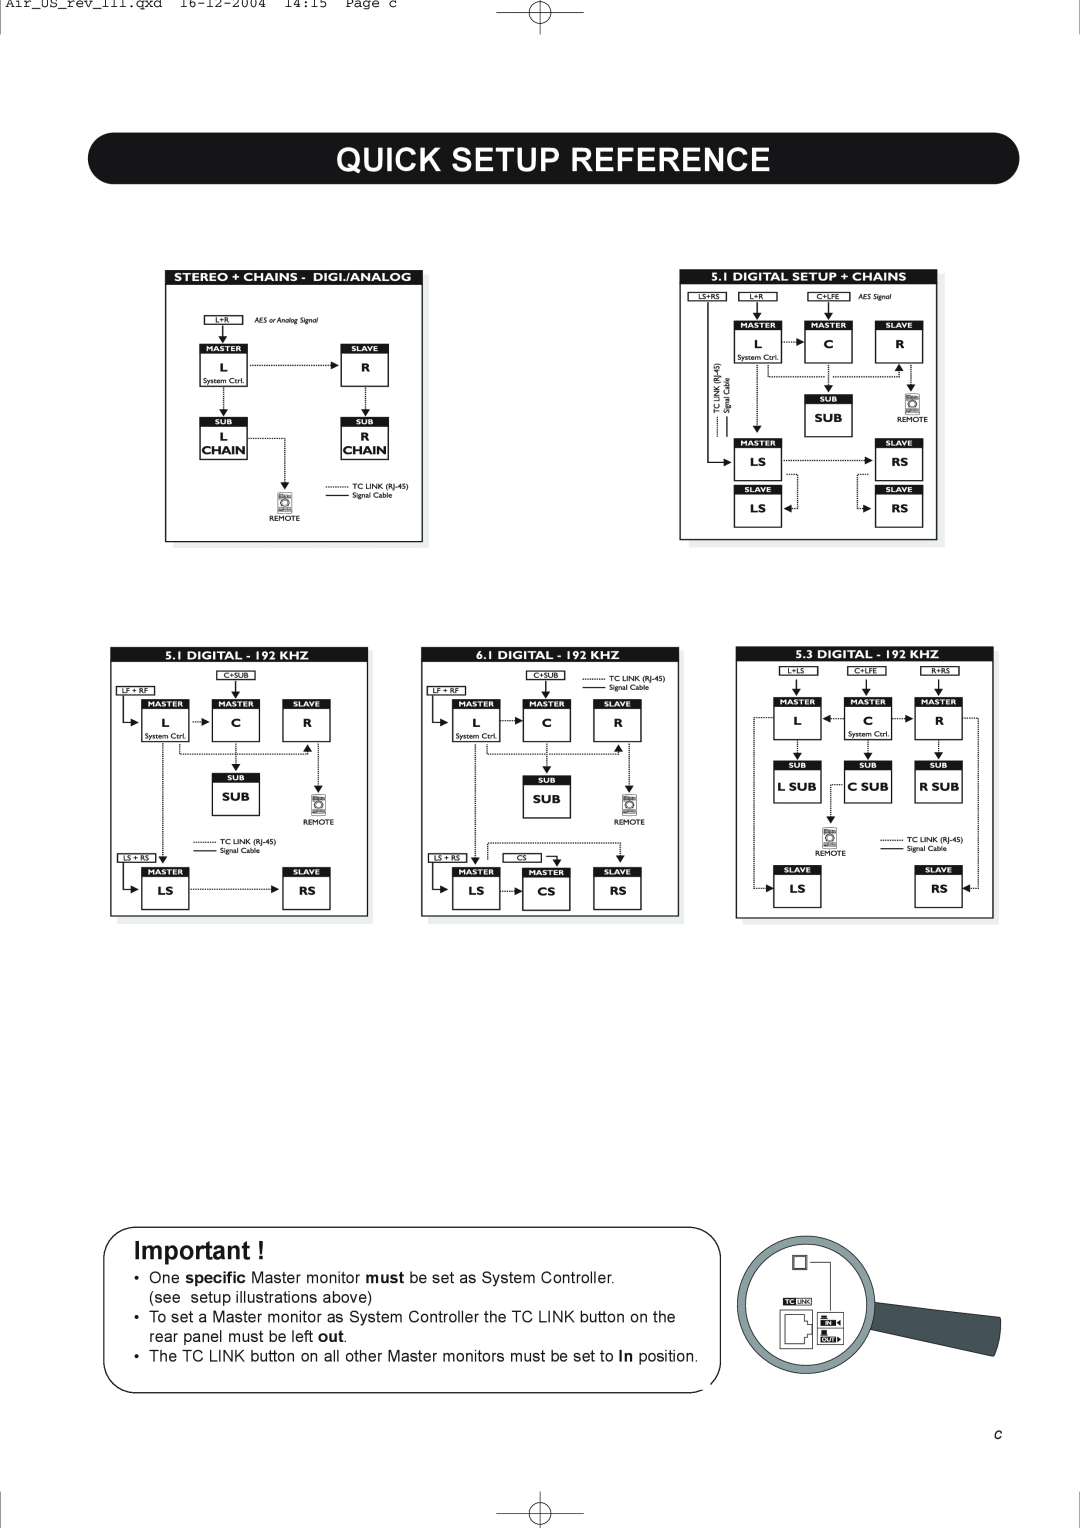 Dynaudio pmn manual Quick Setup Reference, Air US rev 111.qxd 16-12-200414 15 Page c 